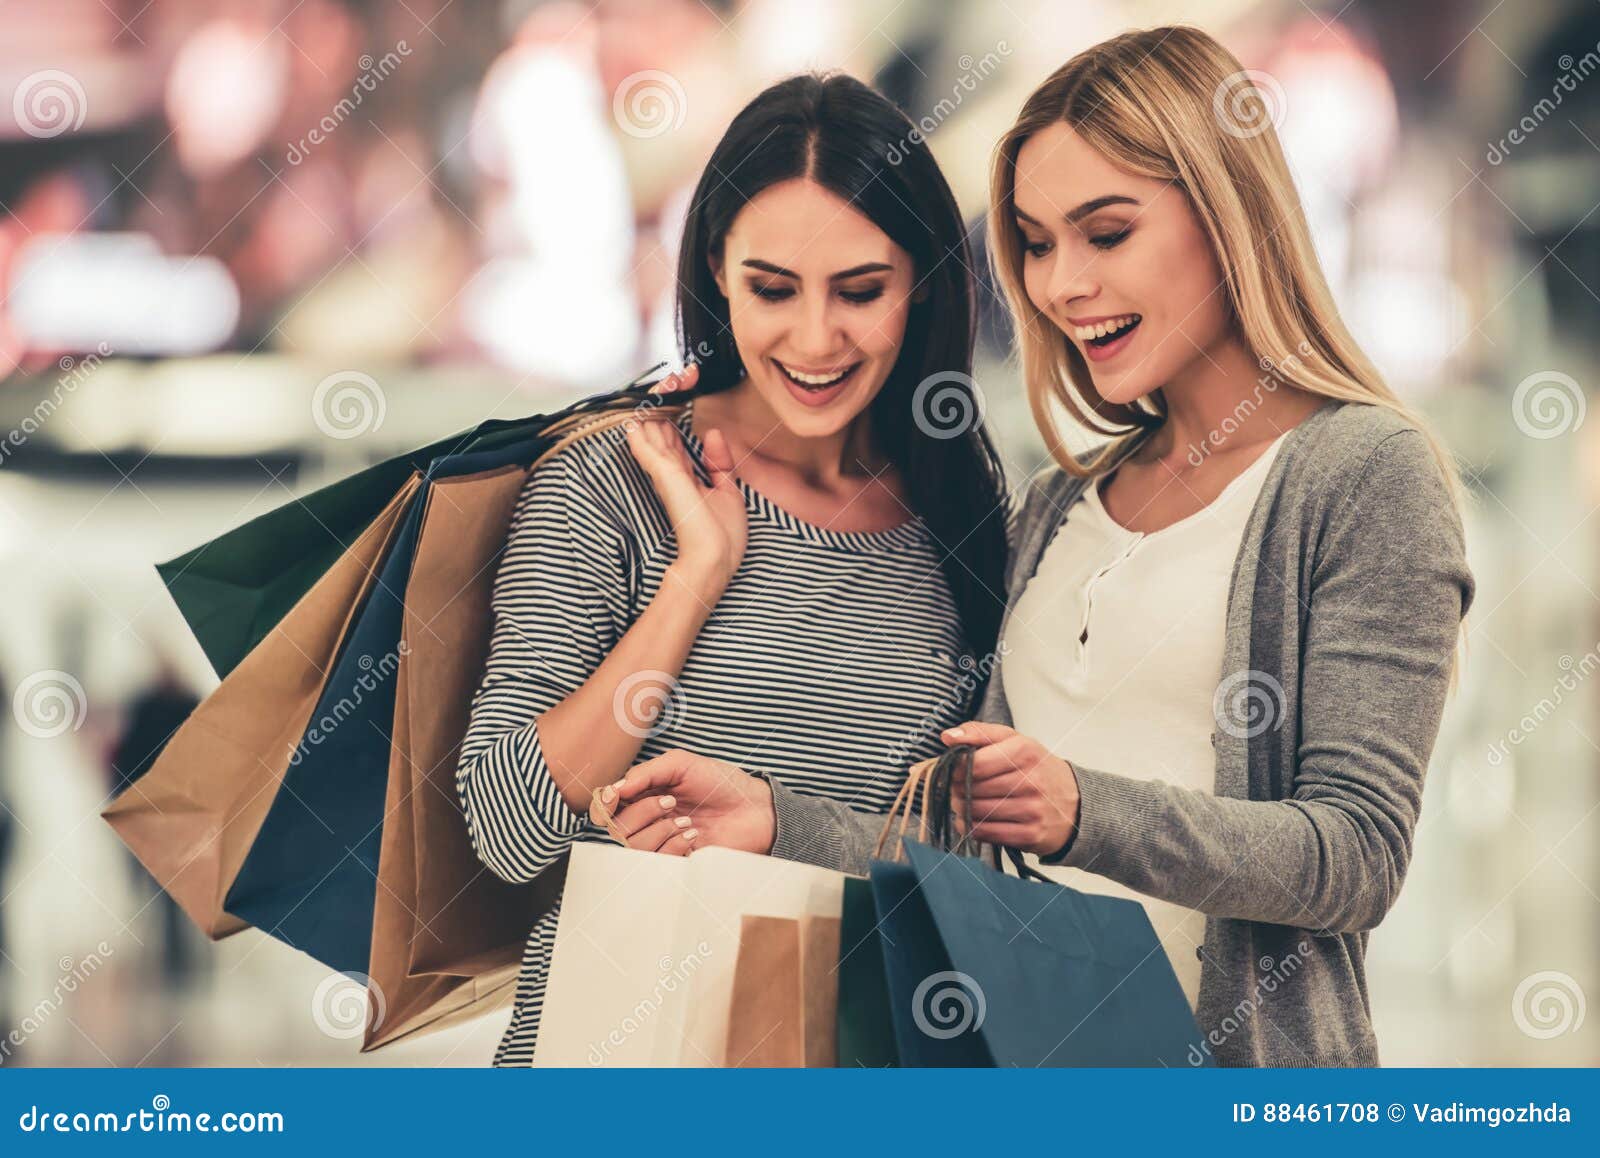 Girls going shopping stock photo. Image of looking, female - 88461708